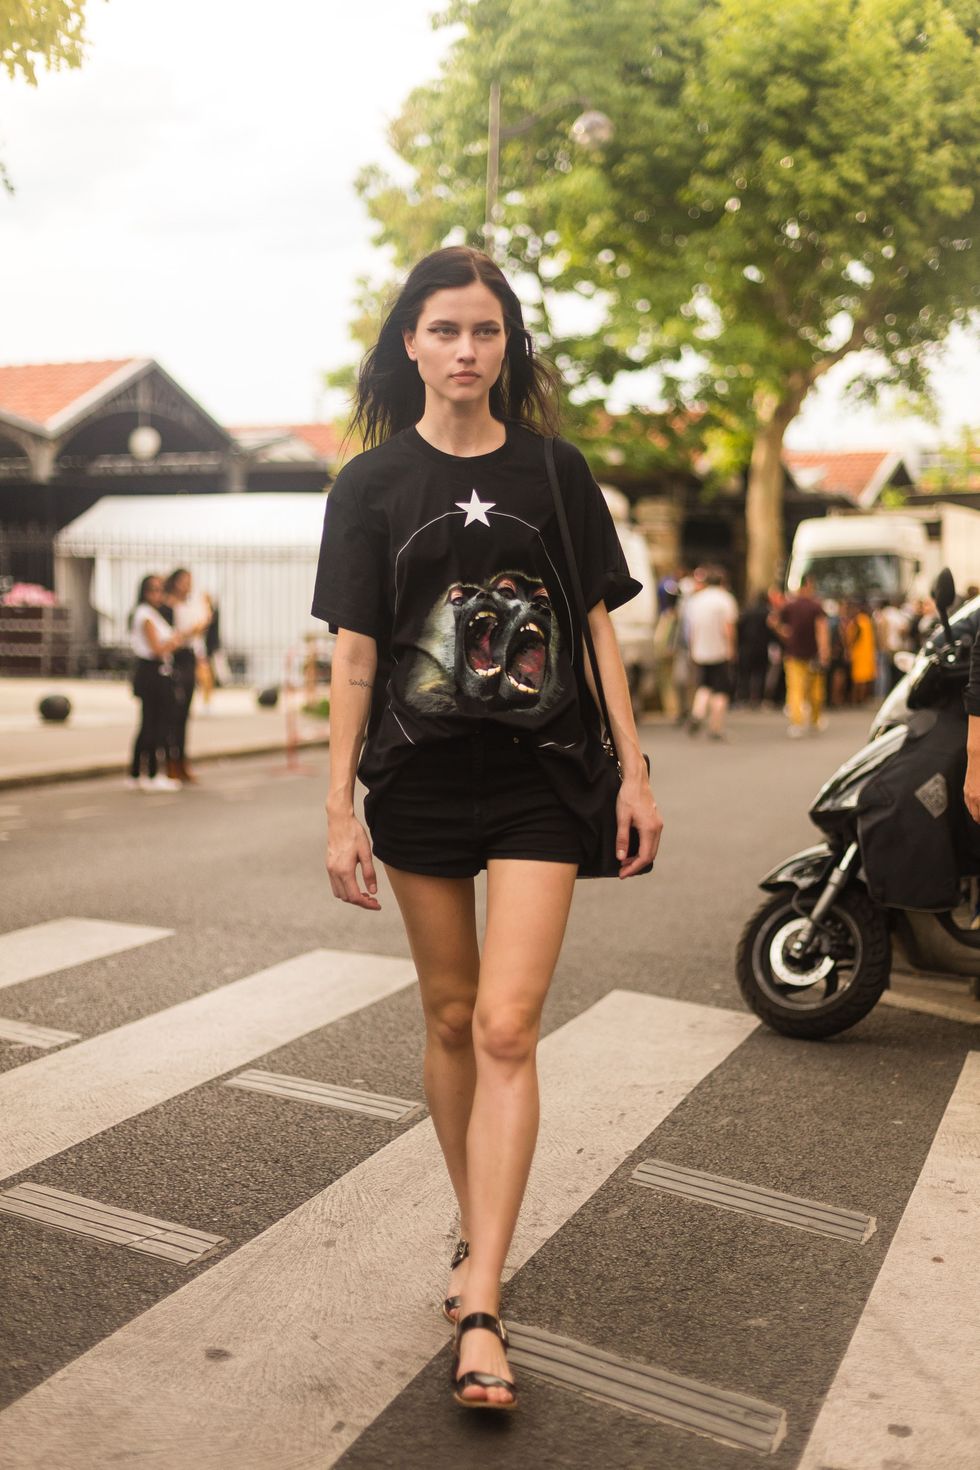 PARIS, FRANCE - JUNE 26:  Model Isis Bataglia exits the Givenchy show in a Givenchy t-shirt on June 26, 2015 in Paris, France.  (Photo by Melodie Jeng/Getty Images)